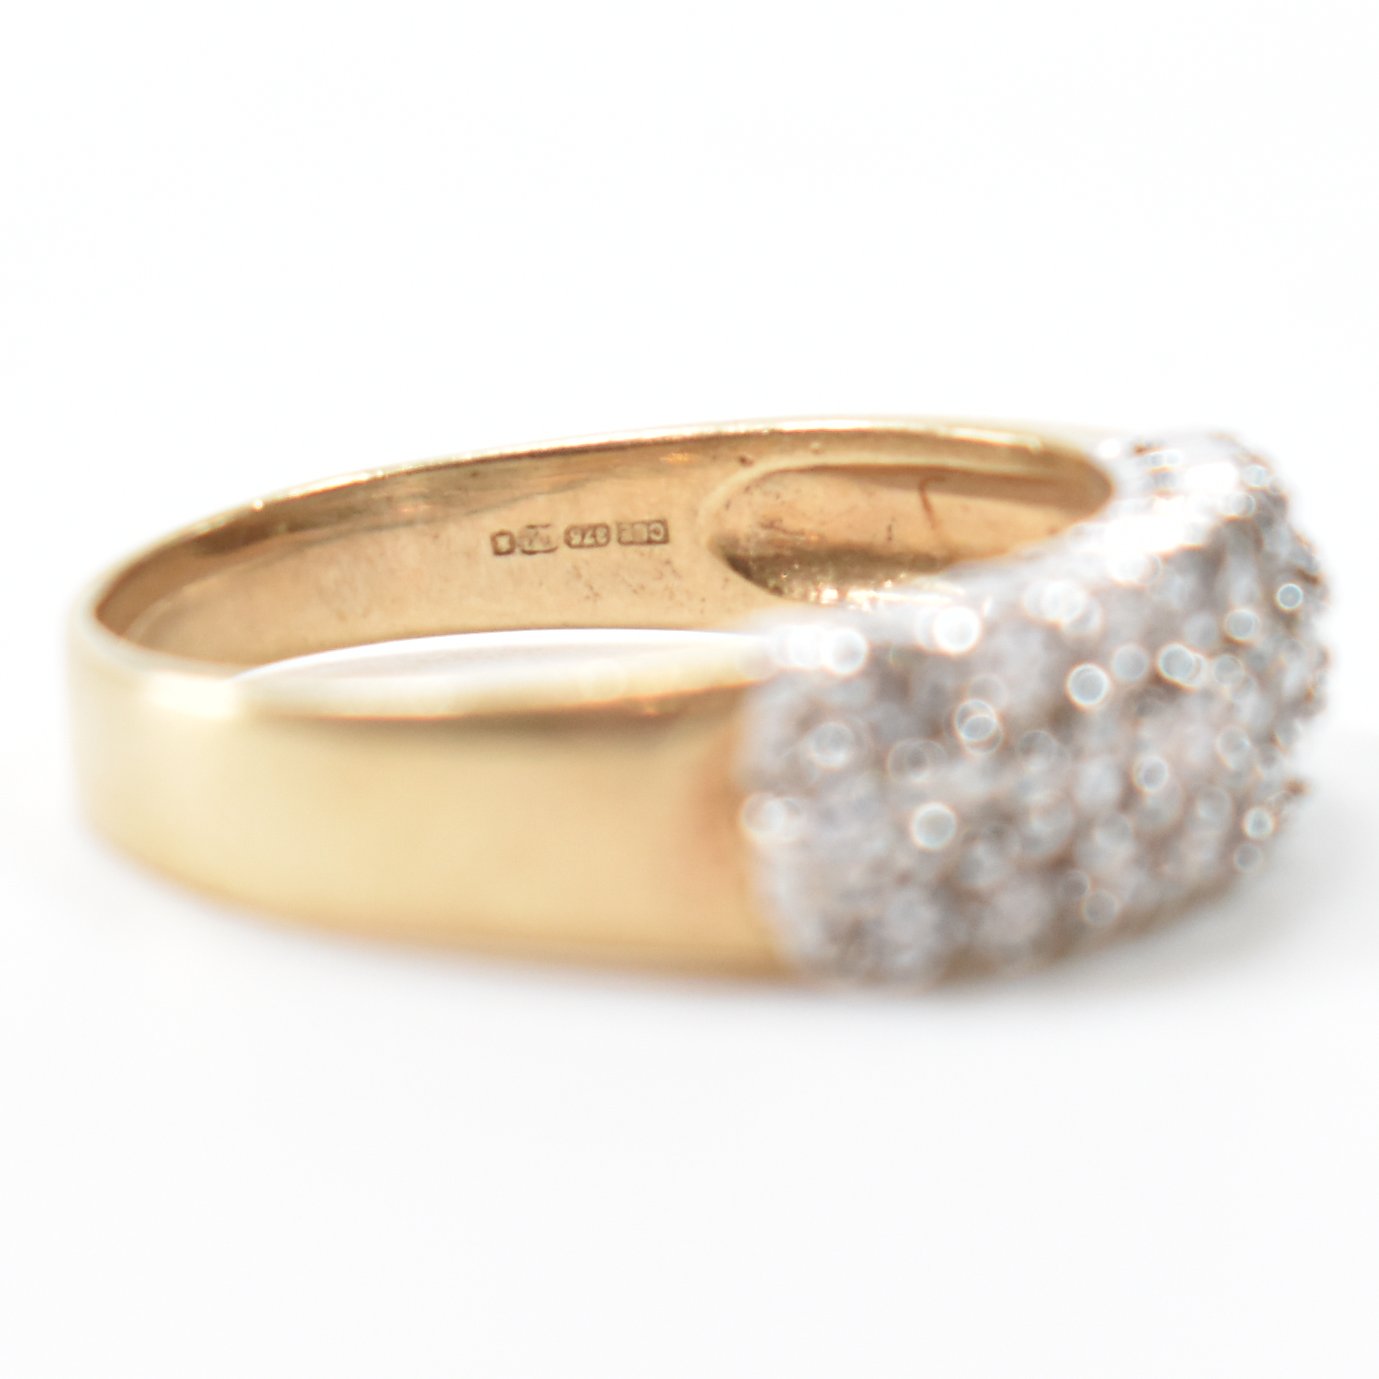 HALLMARKED 9CT GOLD CLUSTER RING - Image 6 of 9